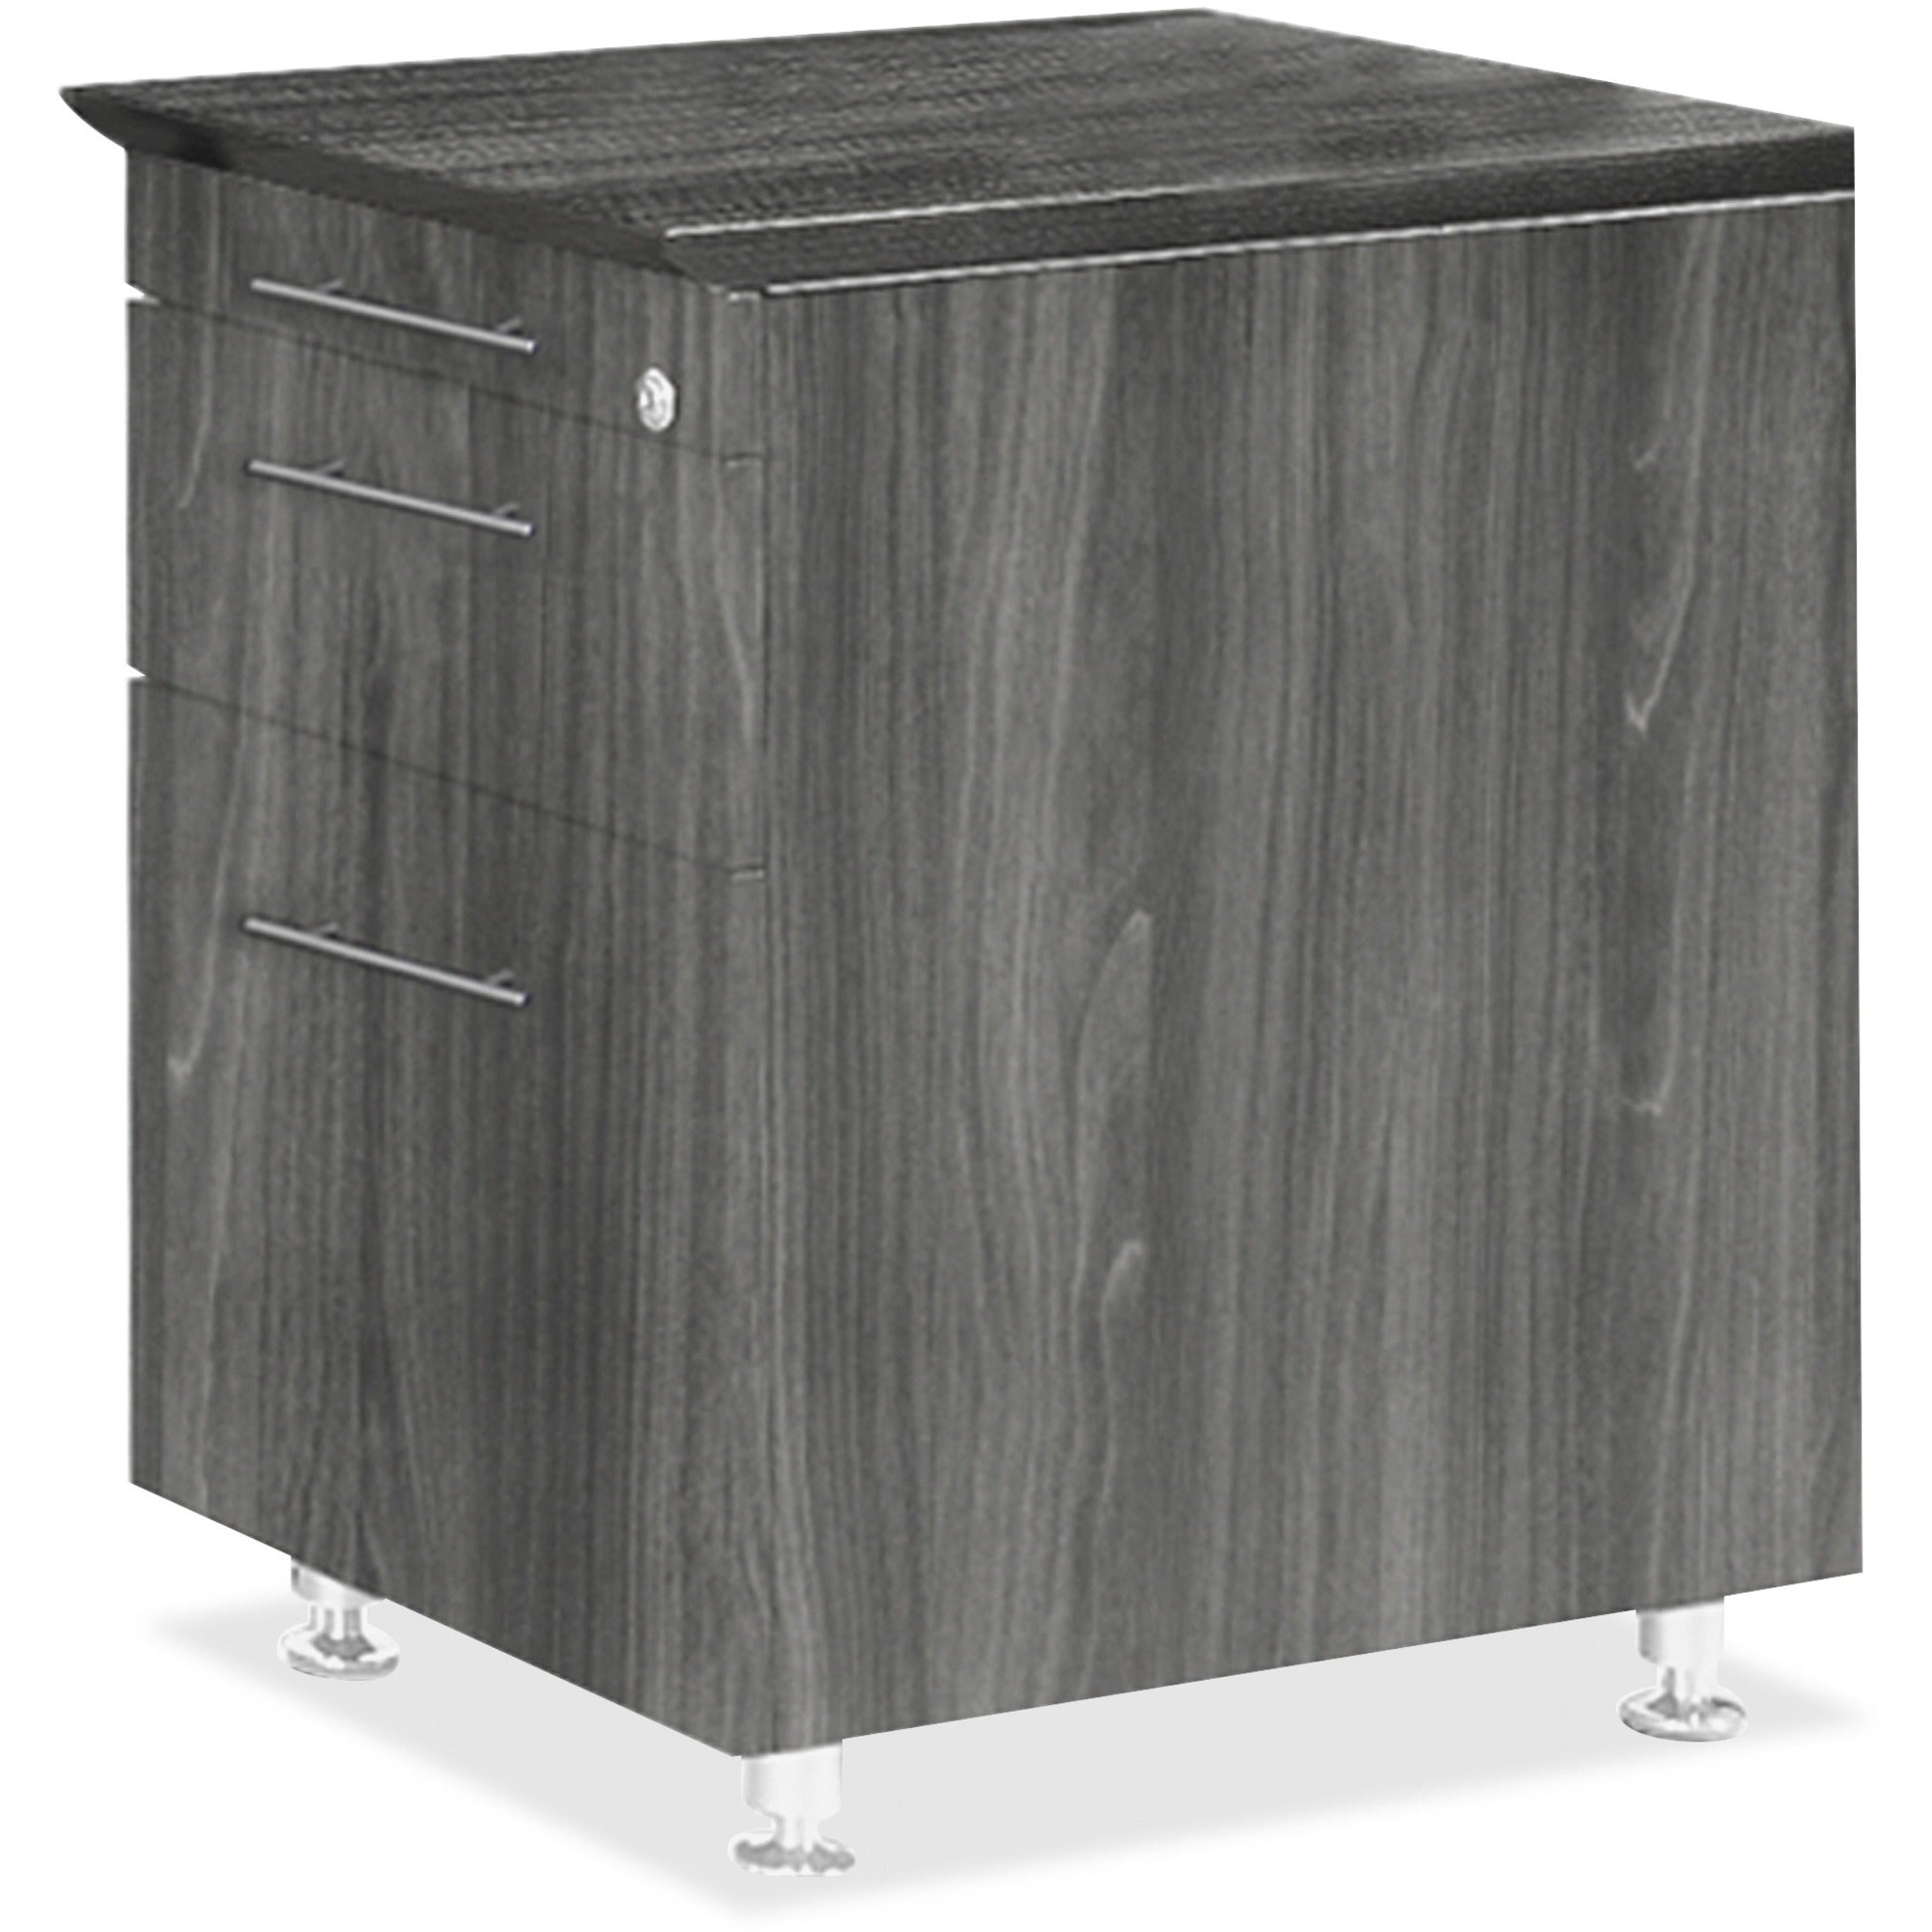 Mayline Medina Series Pencil/Box/File Return Pedestal - 18" x 15"26" , 1" Top - 3 x Storage, Box, File Drawer(s) - Beveled Edge - Material: Steel - Finish: Gray, Laminate, Silver - Stain Resistant, Water Resistant, Abrasion Resistant, Durable, Leveli - 